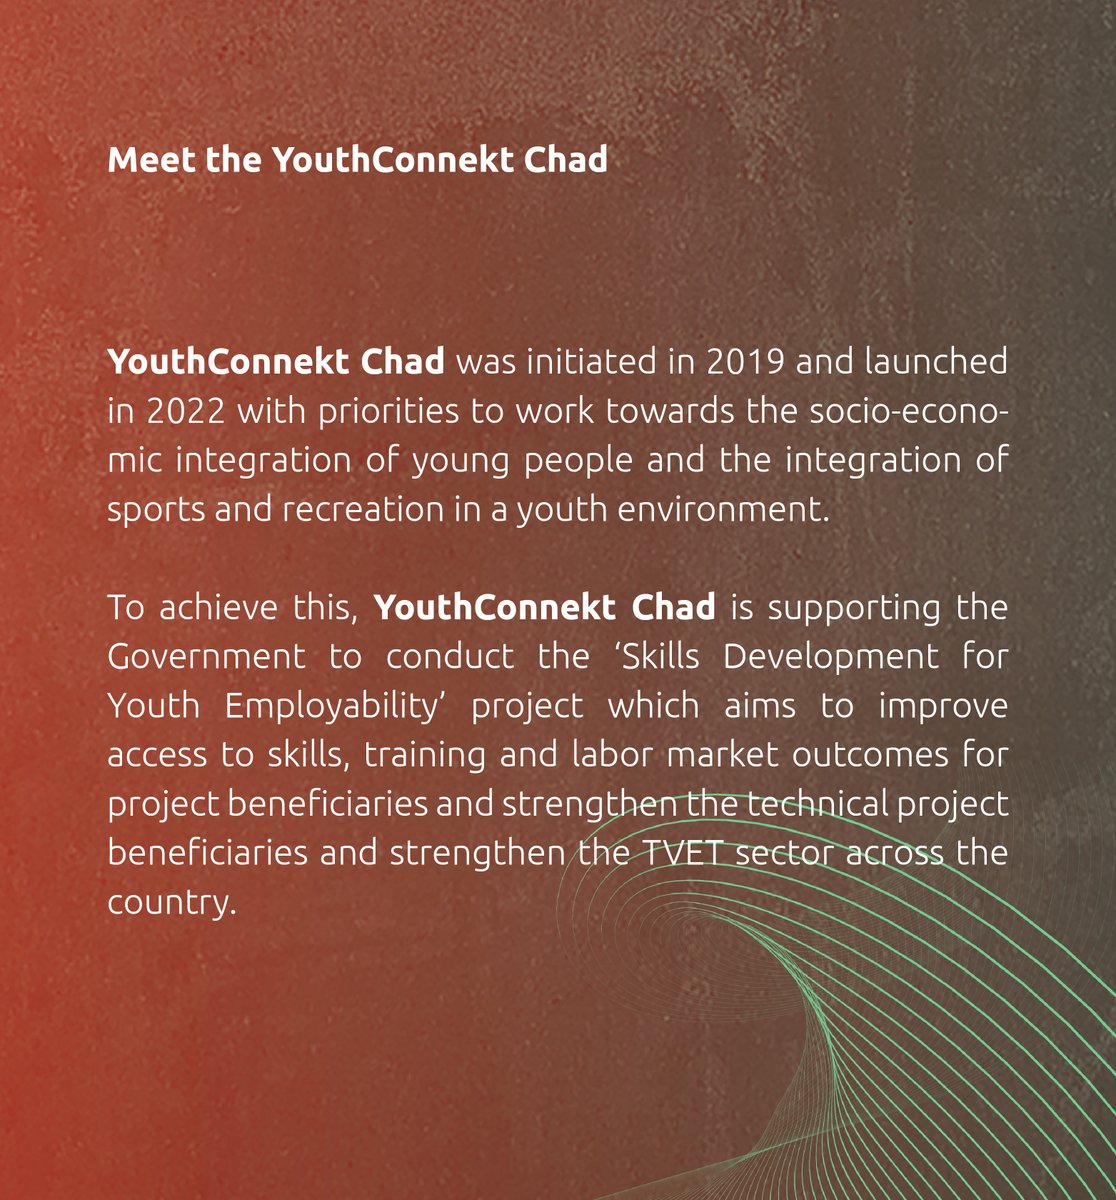 YouthConnektAf tweet picture